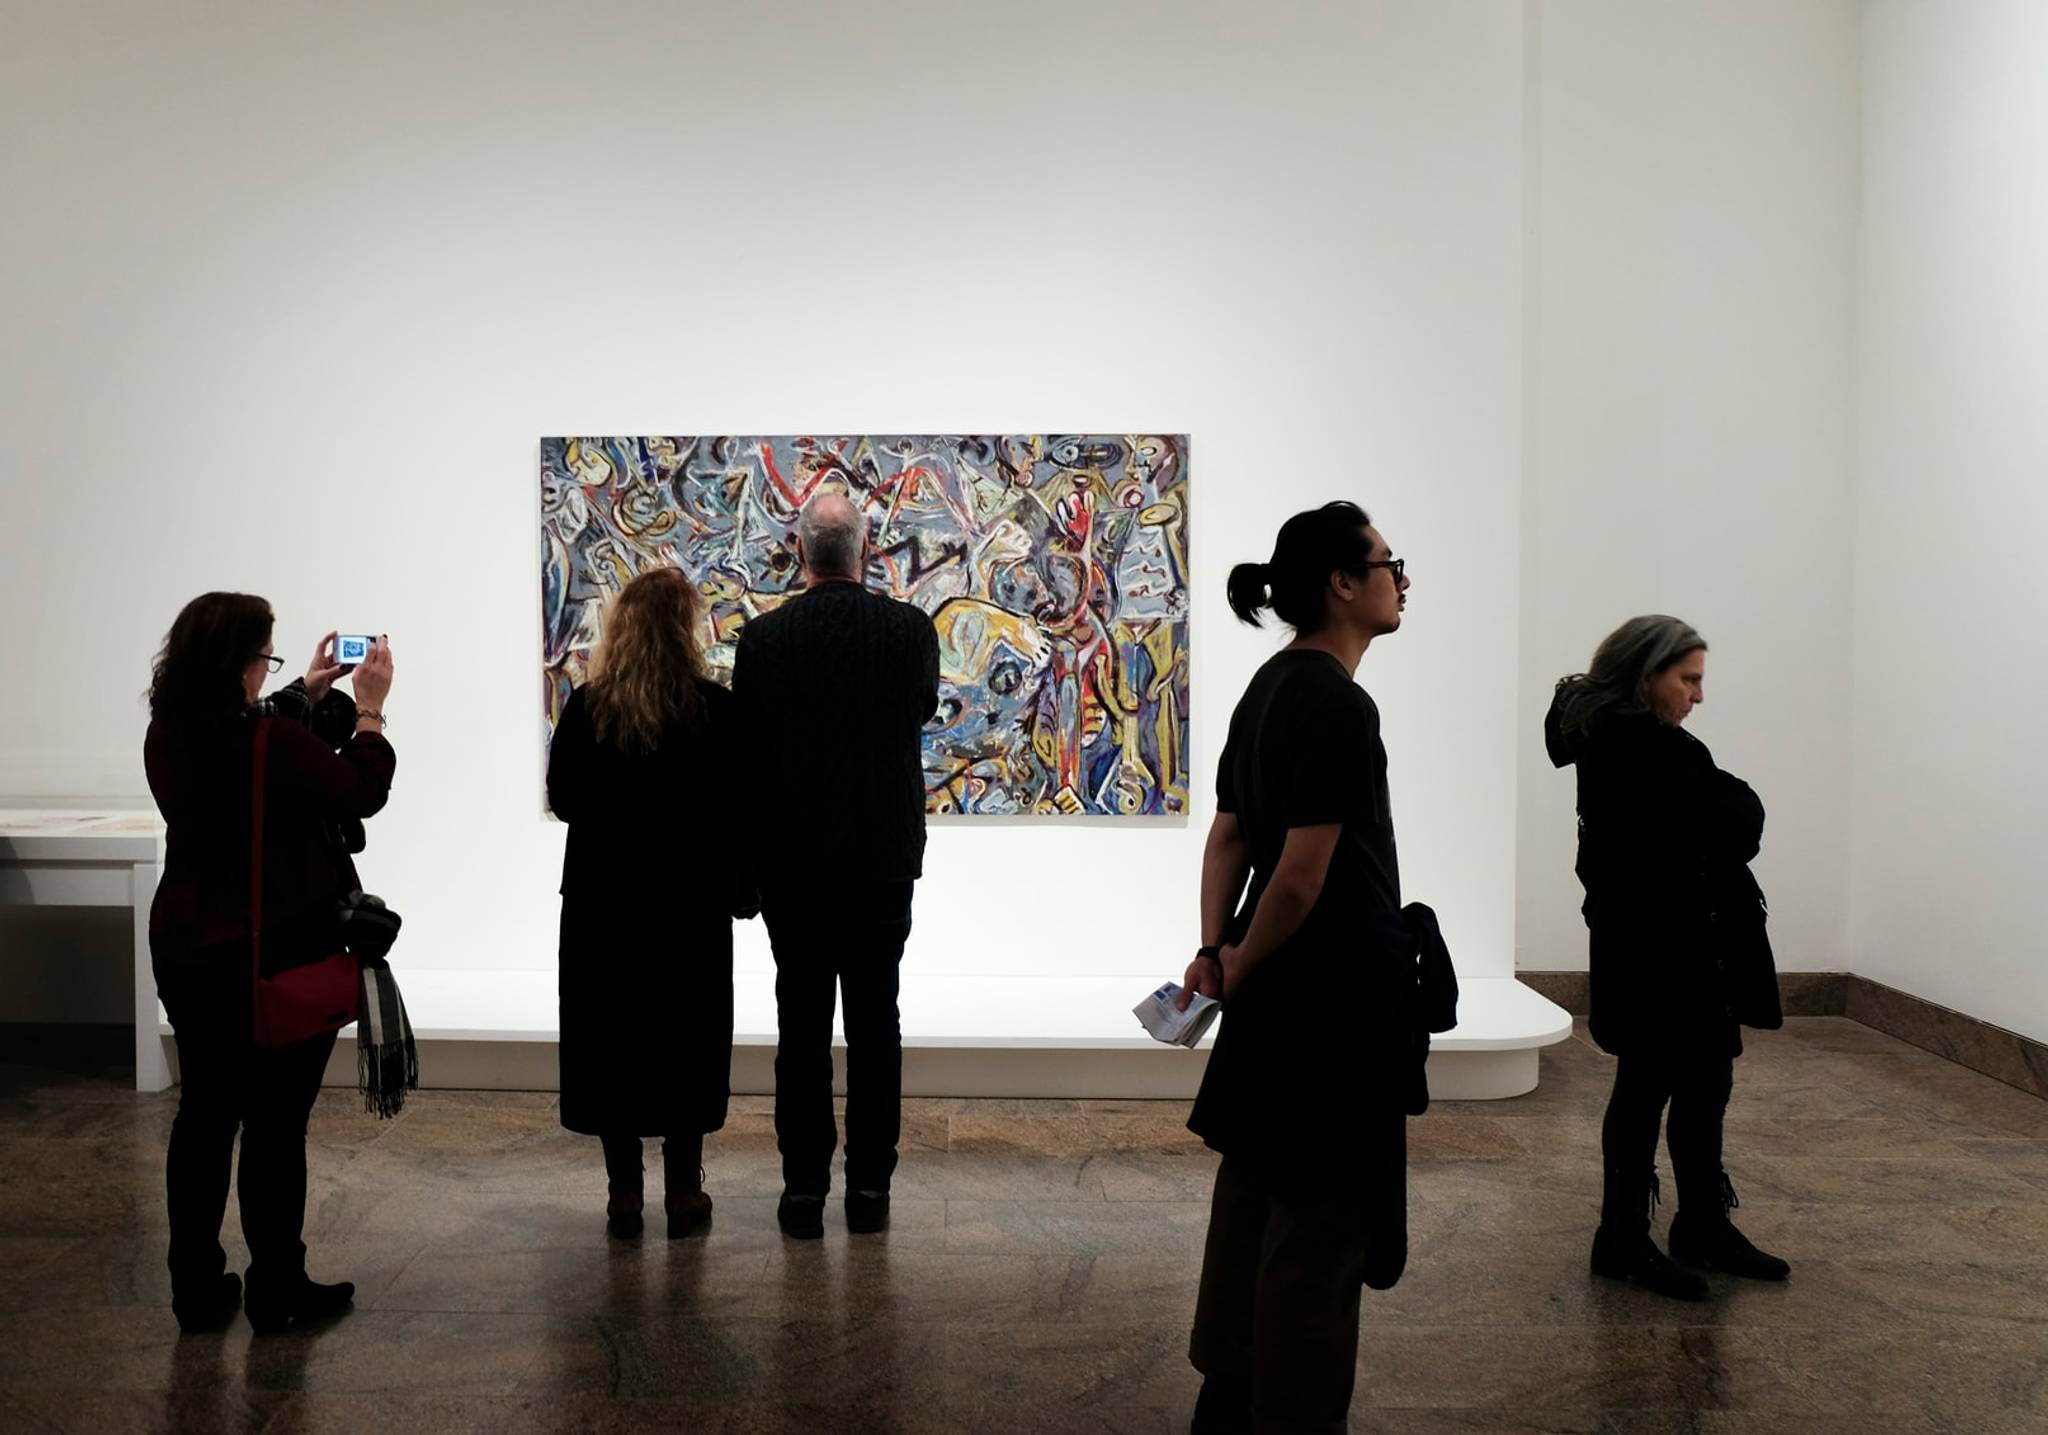 AI can accurately predict people’s art preferences